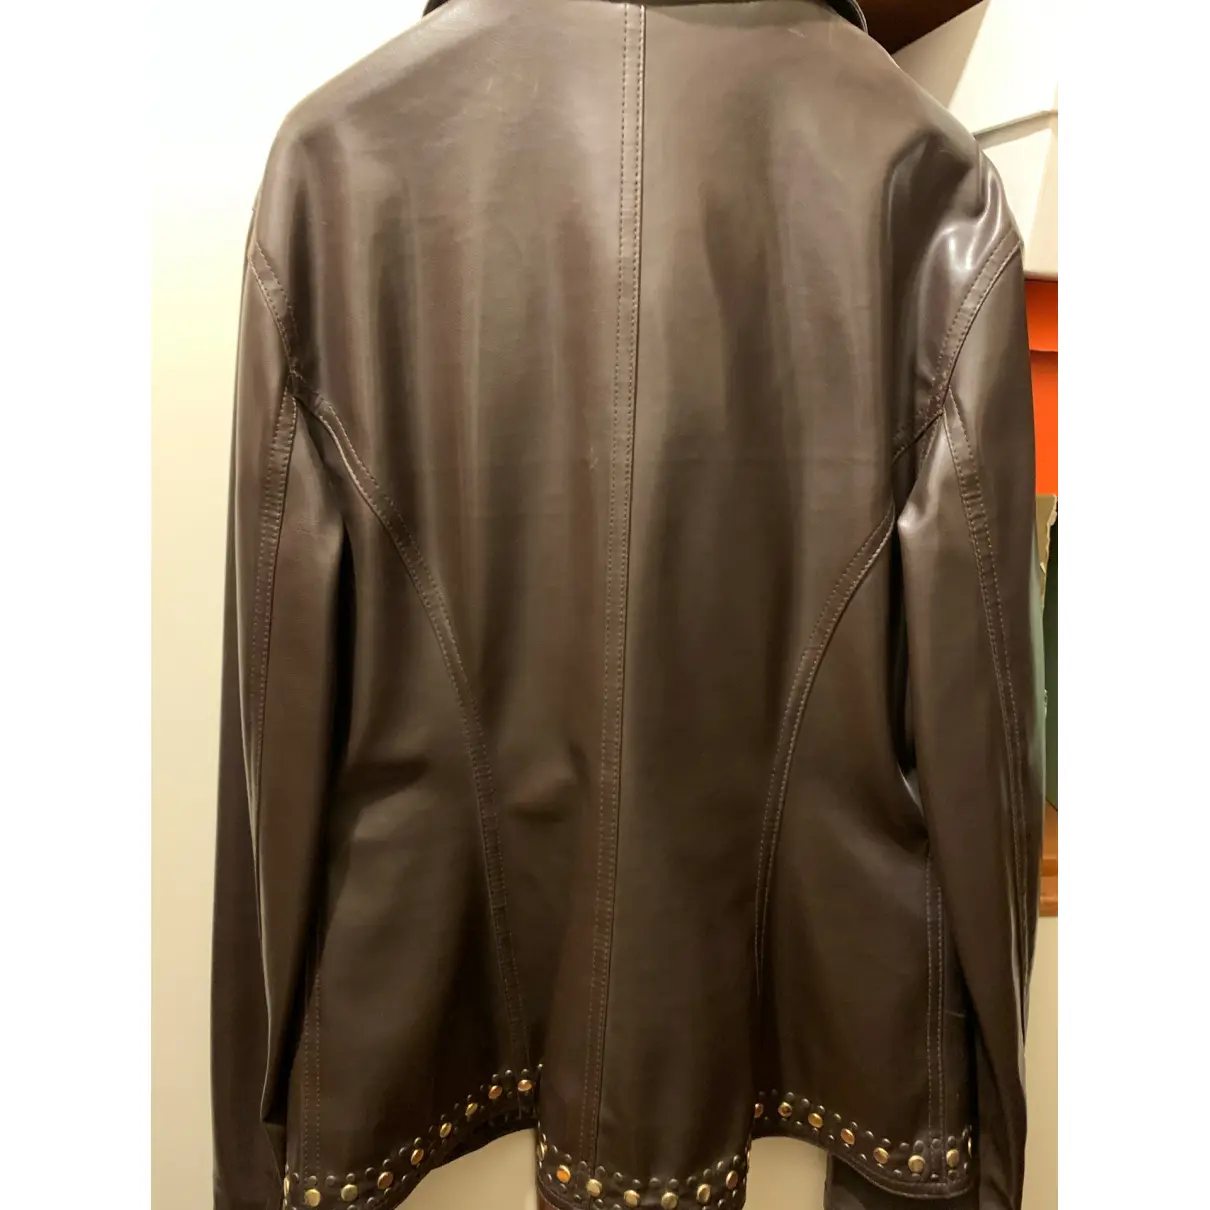 Buy Moschino Cheap And Chic Leather biker jacket online